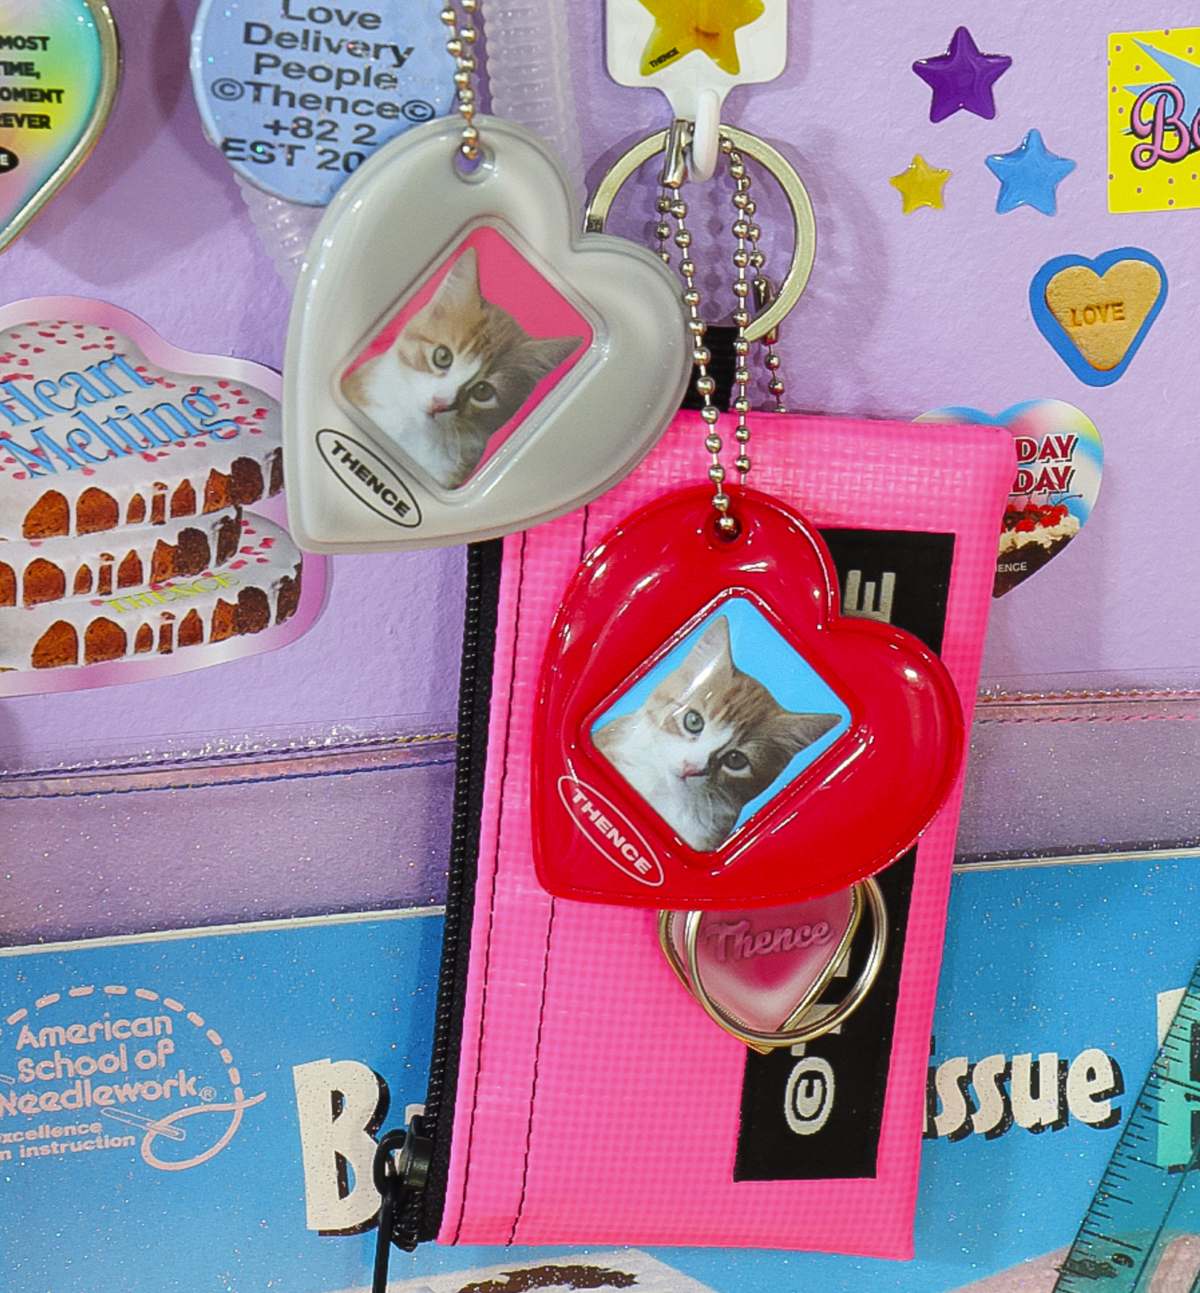 Claire's-Keyholder